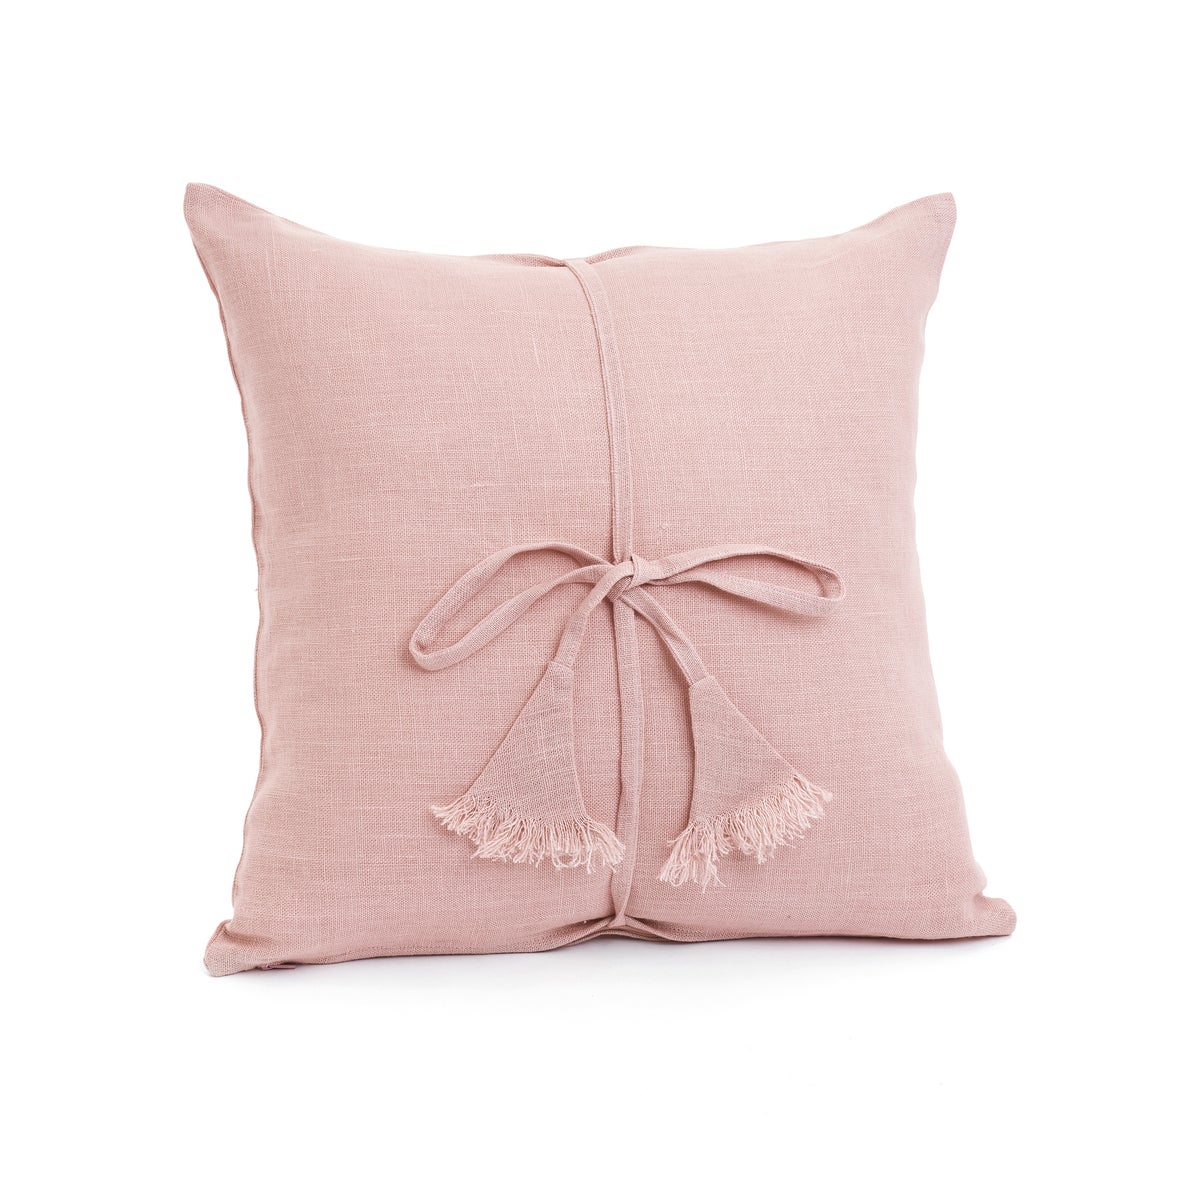 Pillow Tuso Linen Tie Knot Dusty Pink 20x20